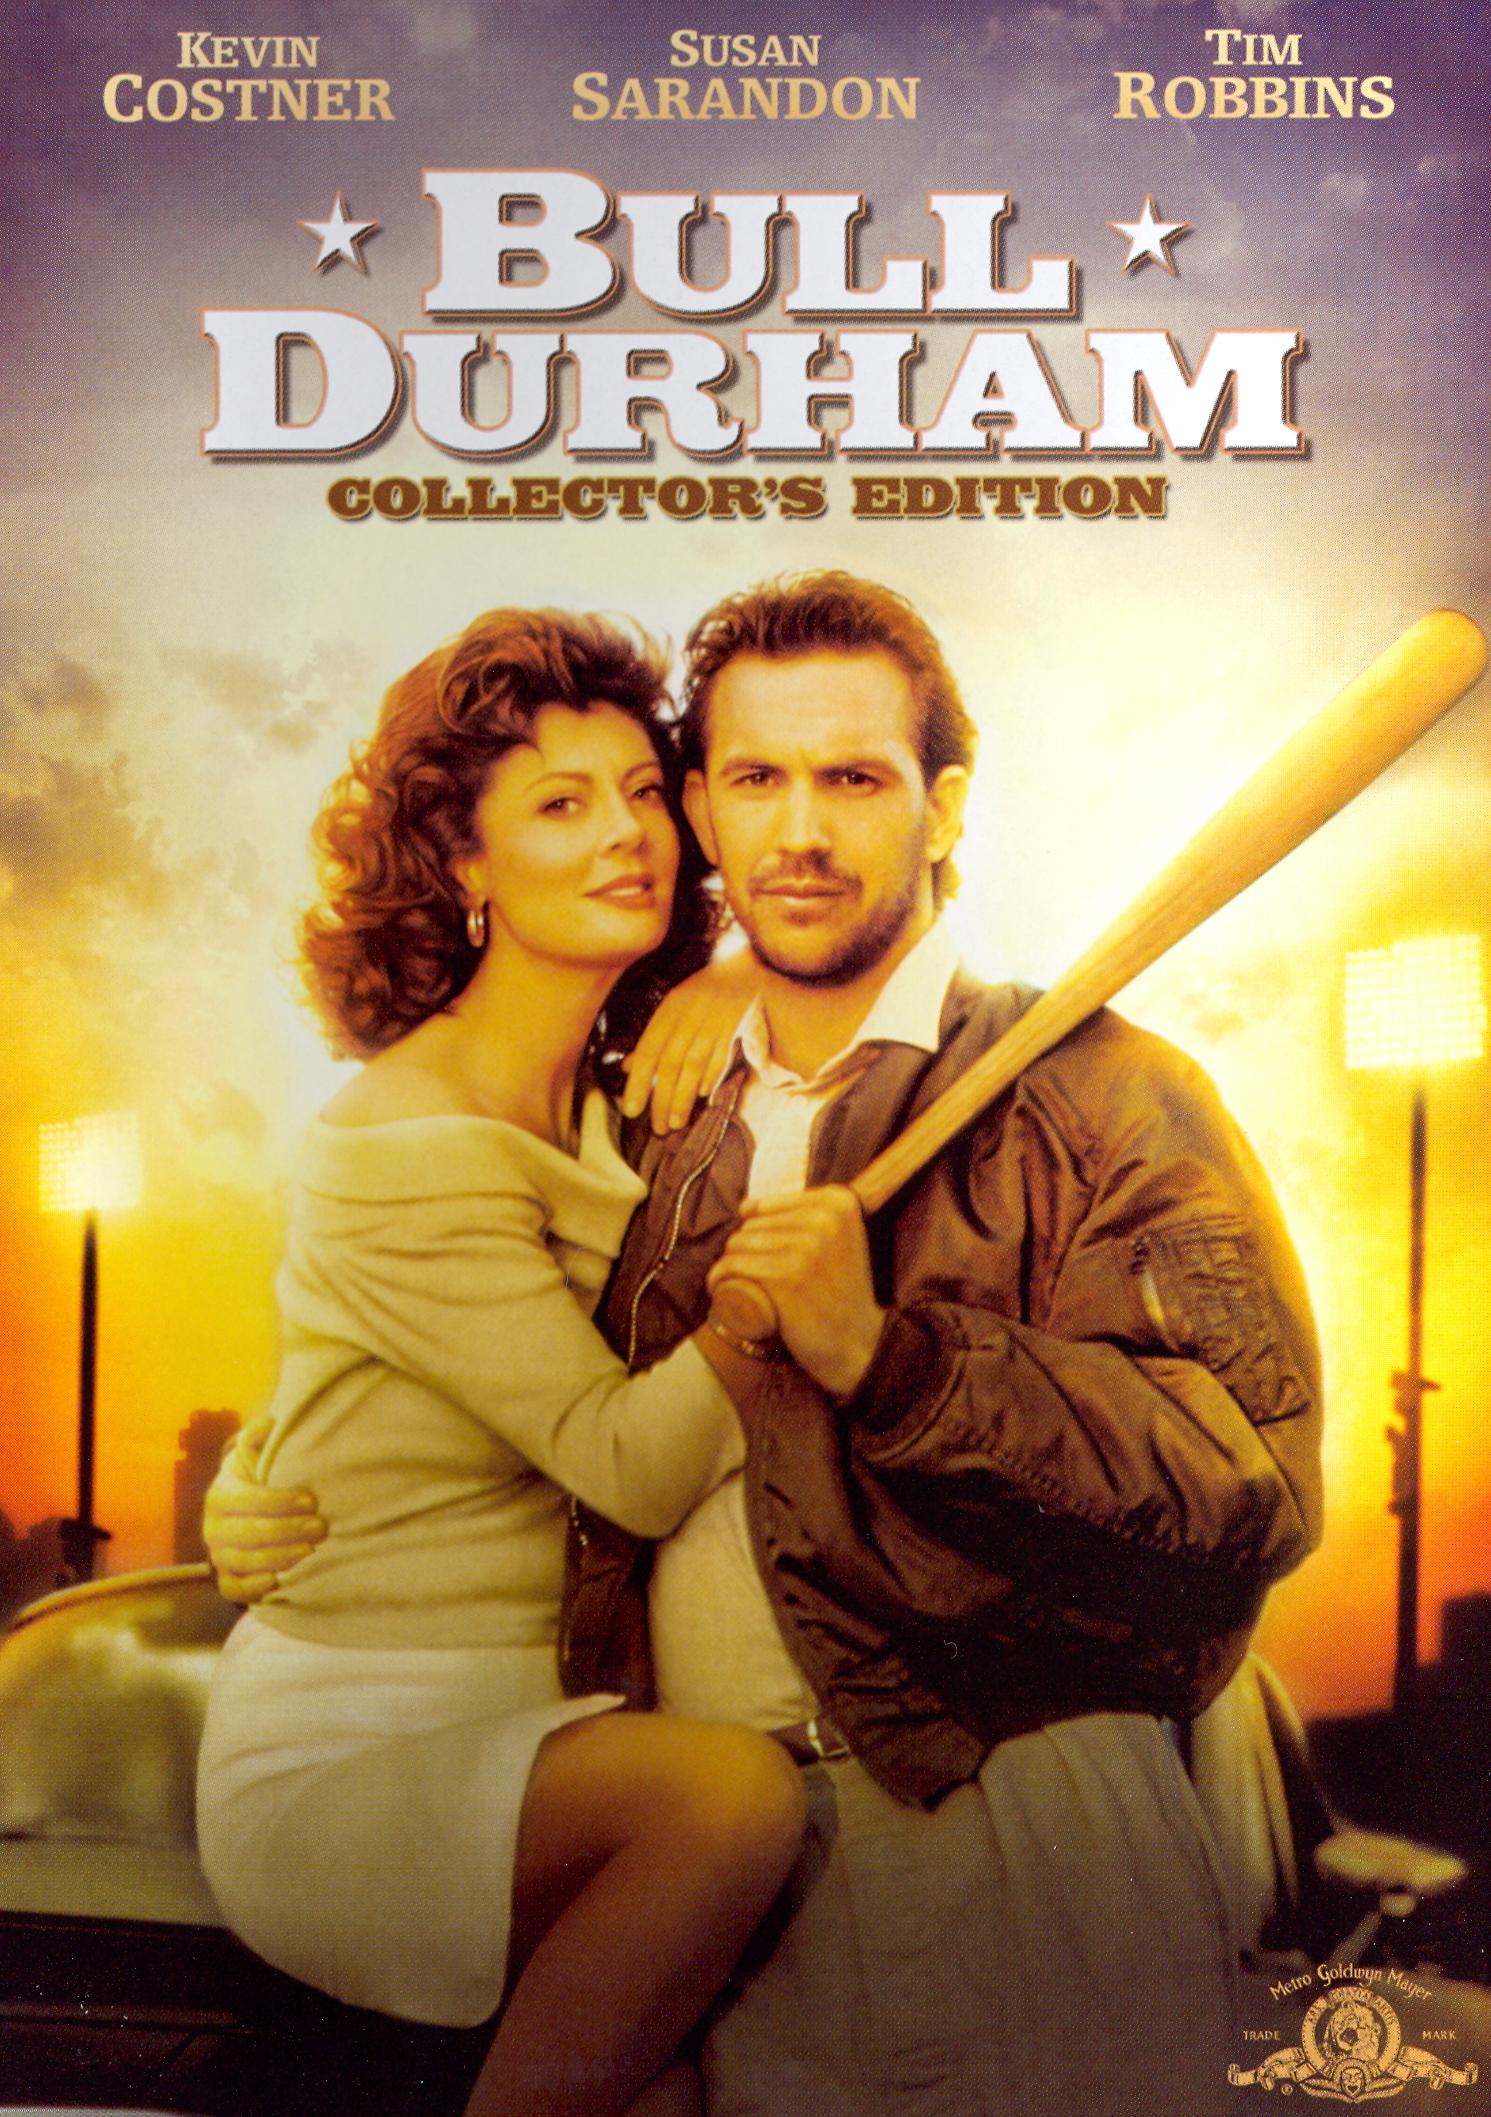 For the first time: Bull Durham, The Musical, based on 1988 movie